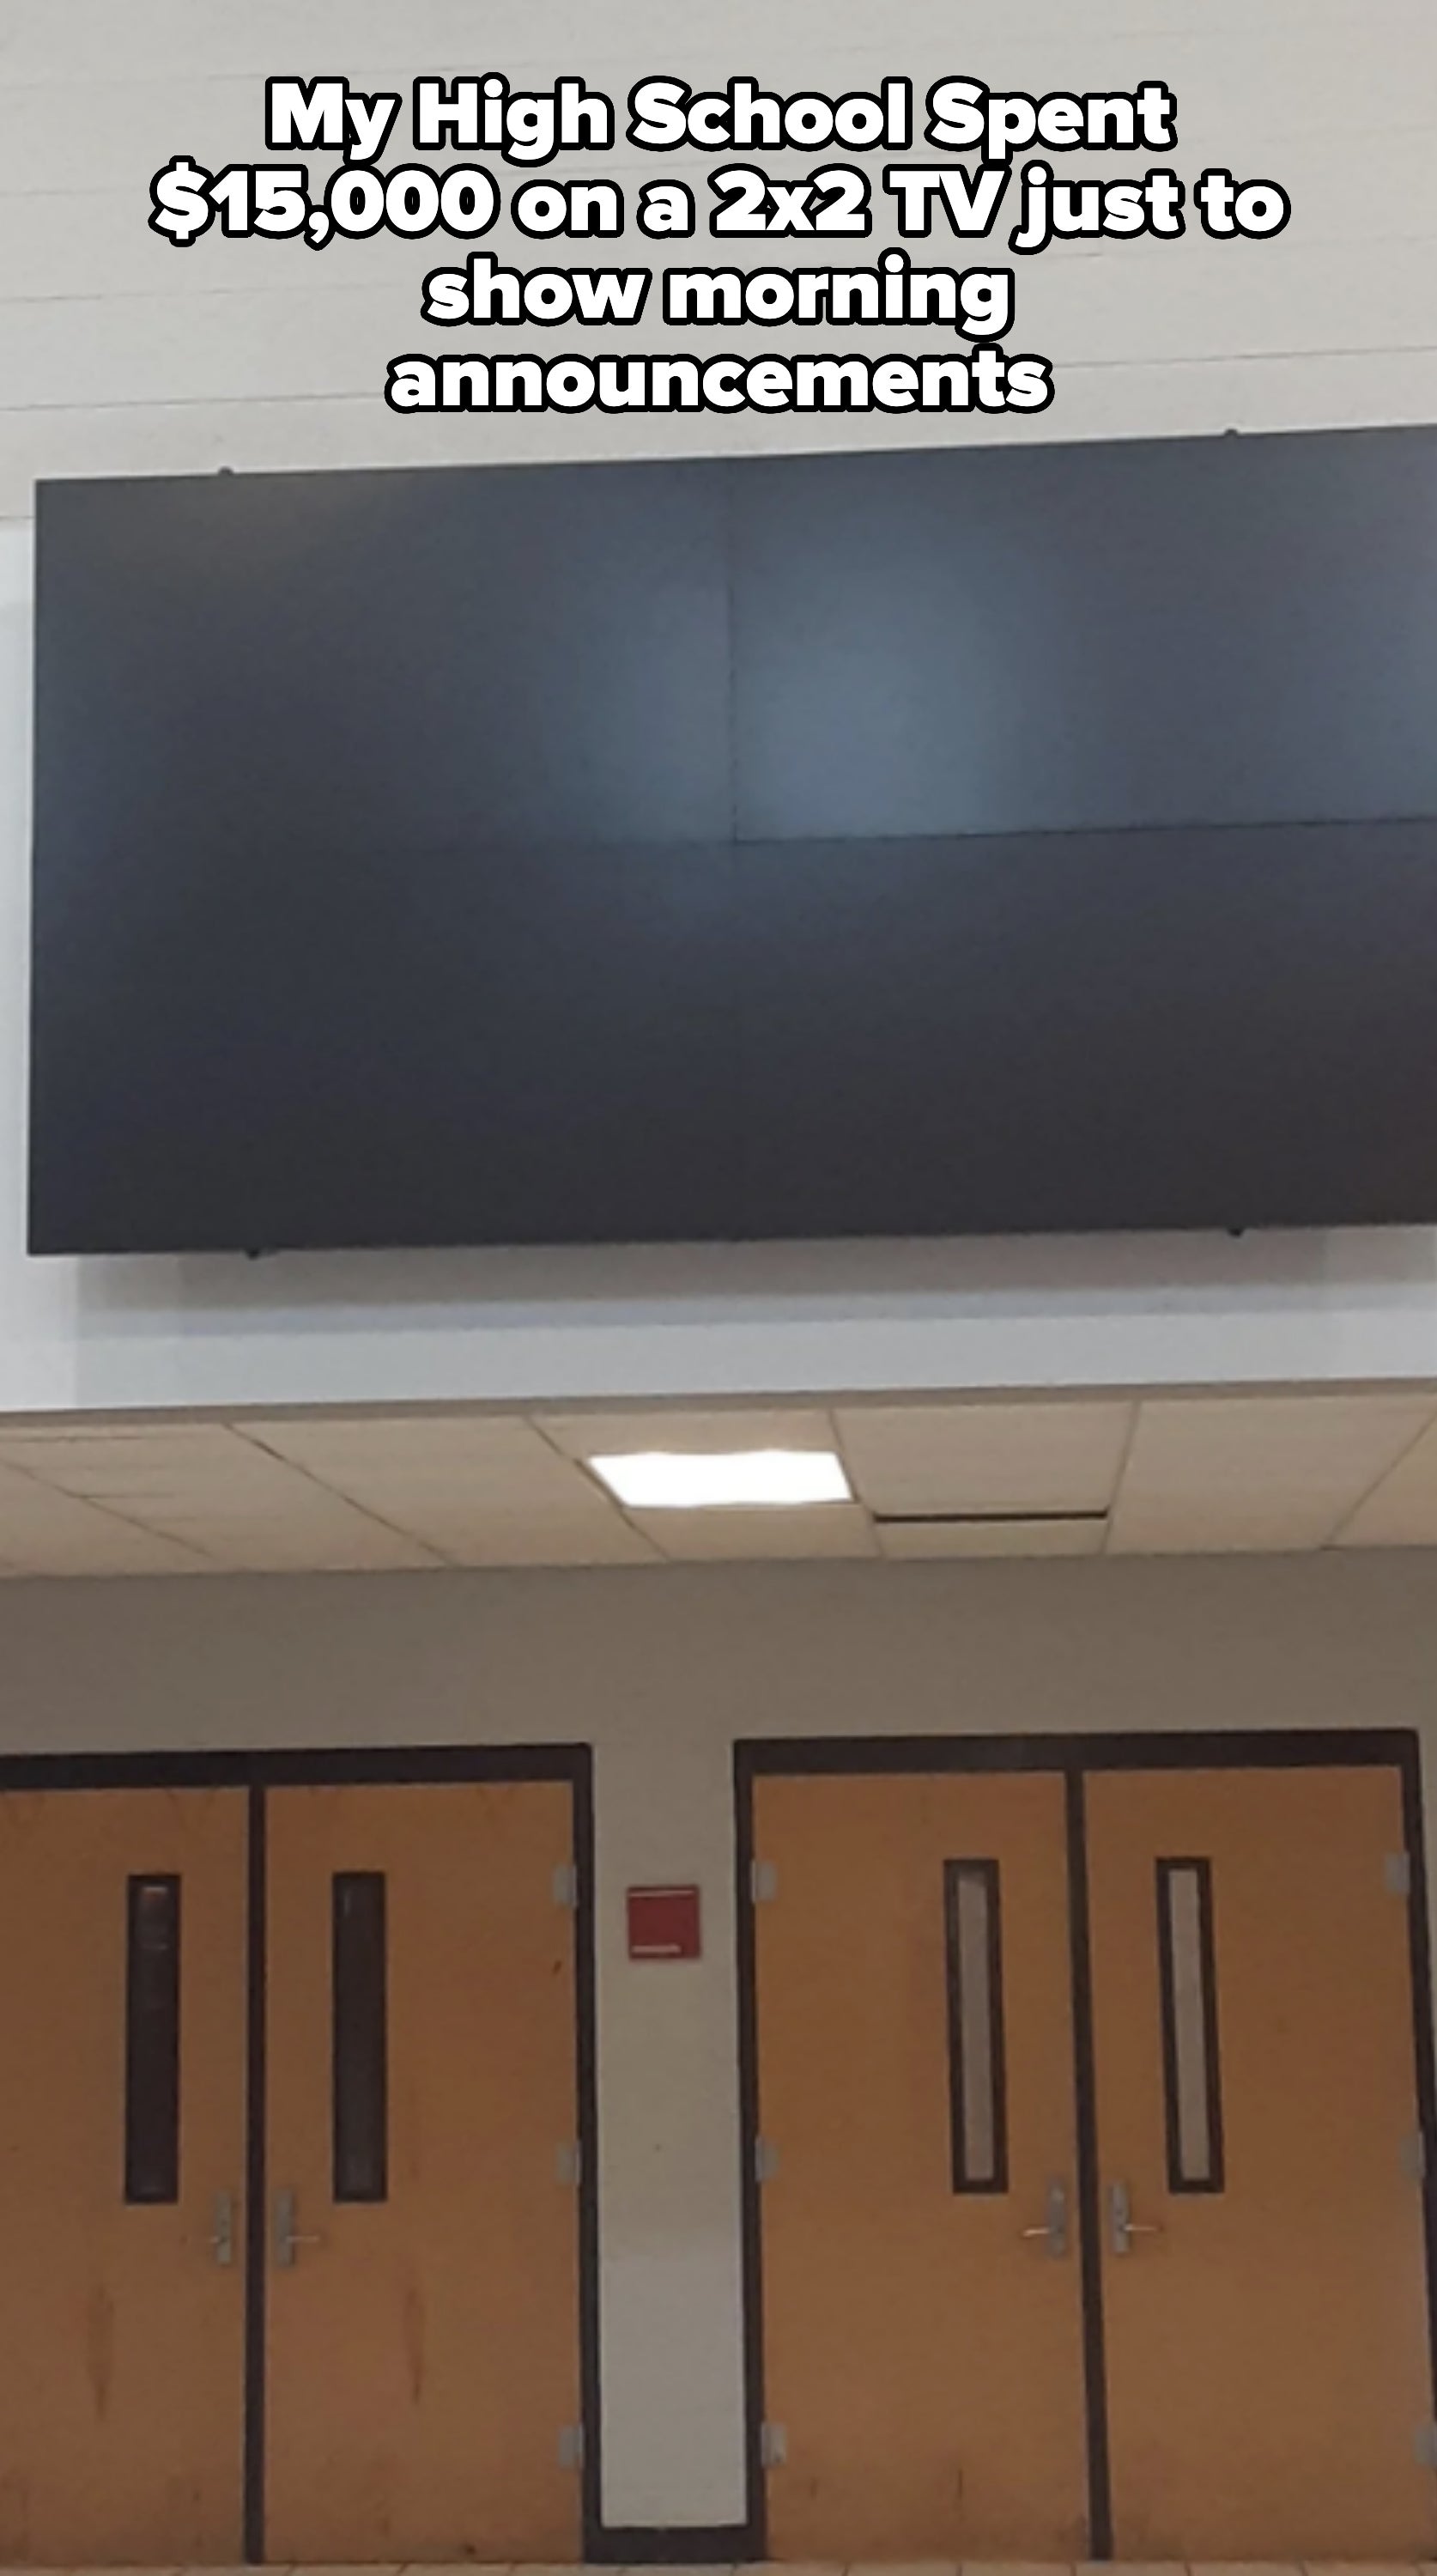 A large blank display screen mounted above a set of double doors in a public building